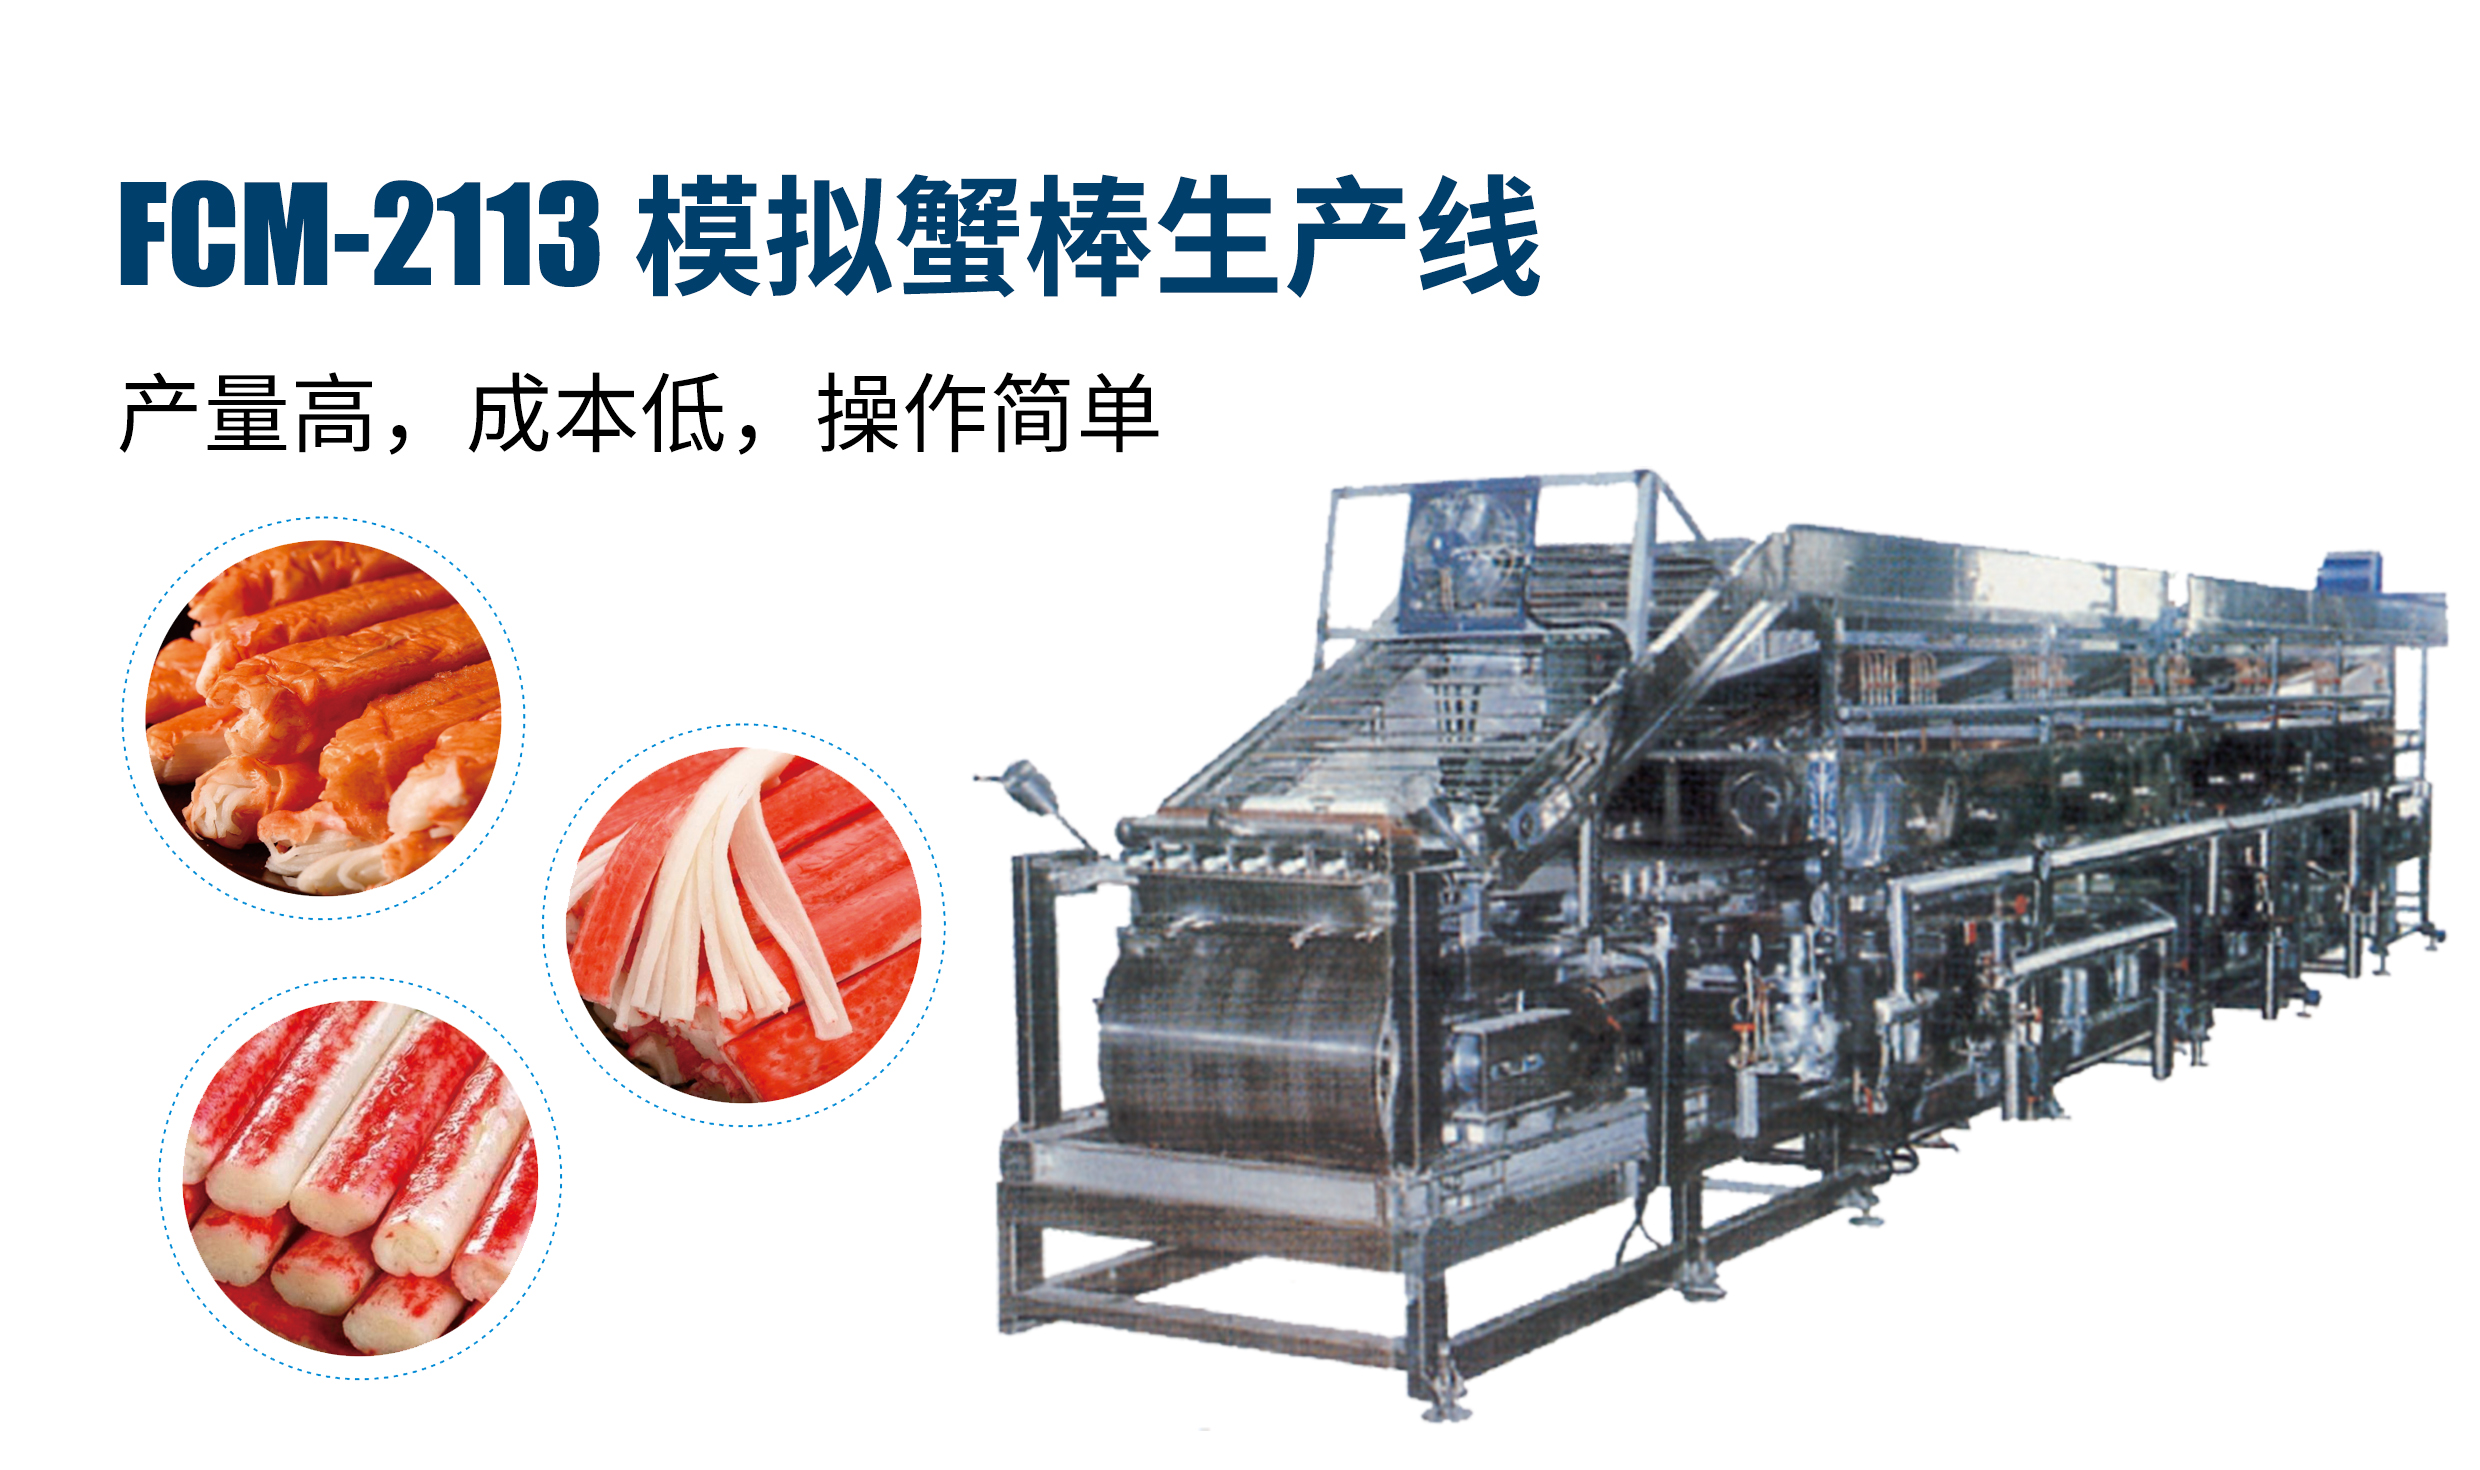 Simulated crab stick production line